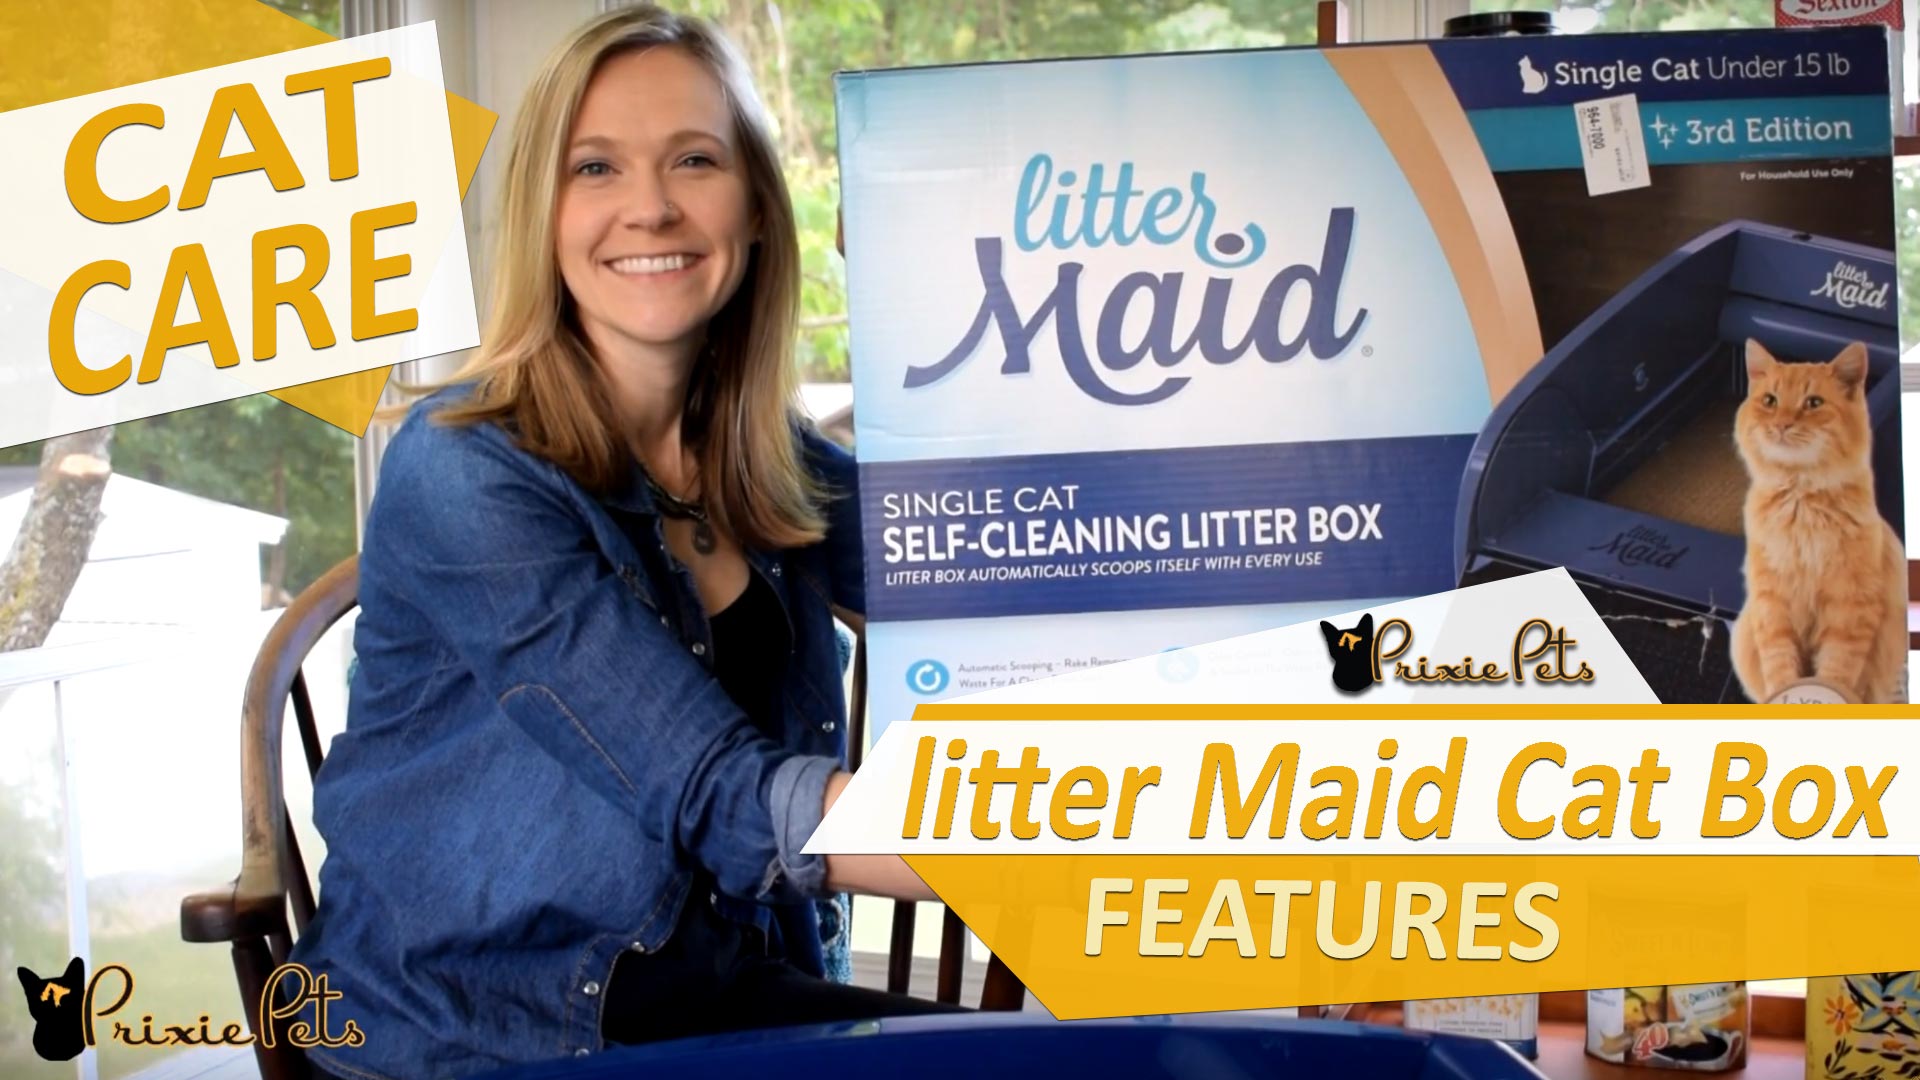 Litter Maid Automatic self-cleaning multi-cat litter box